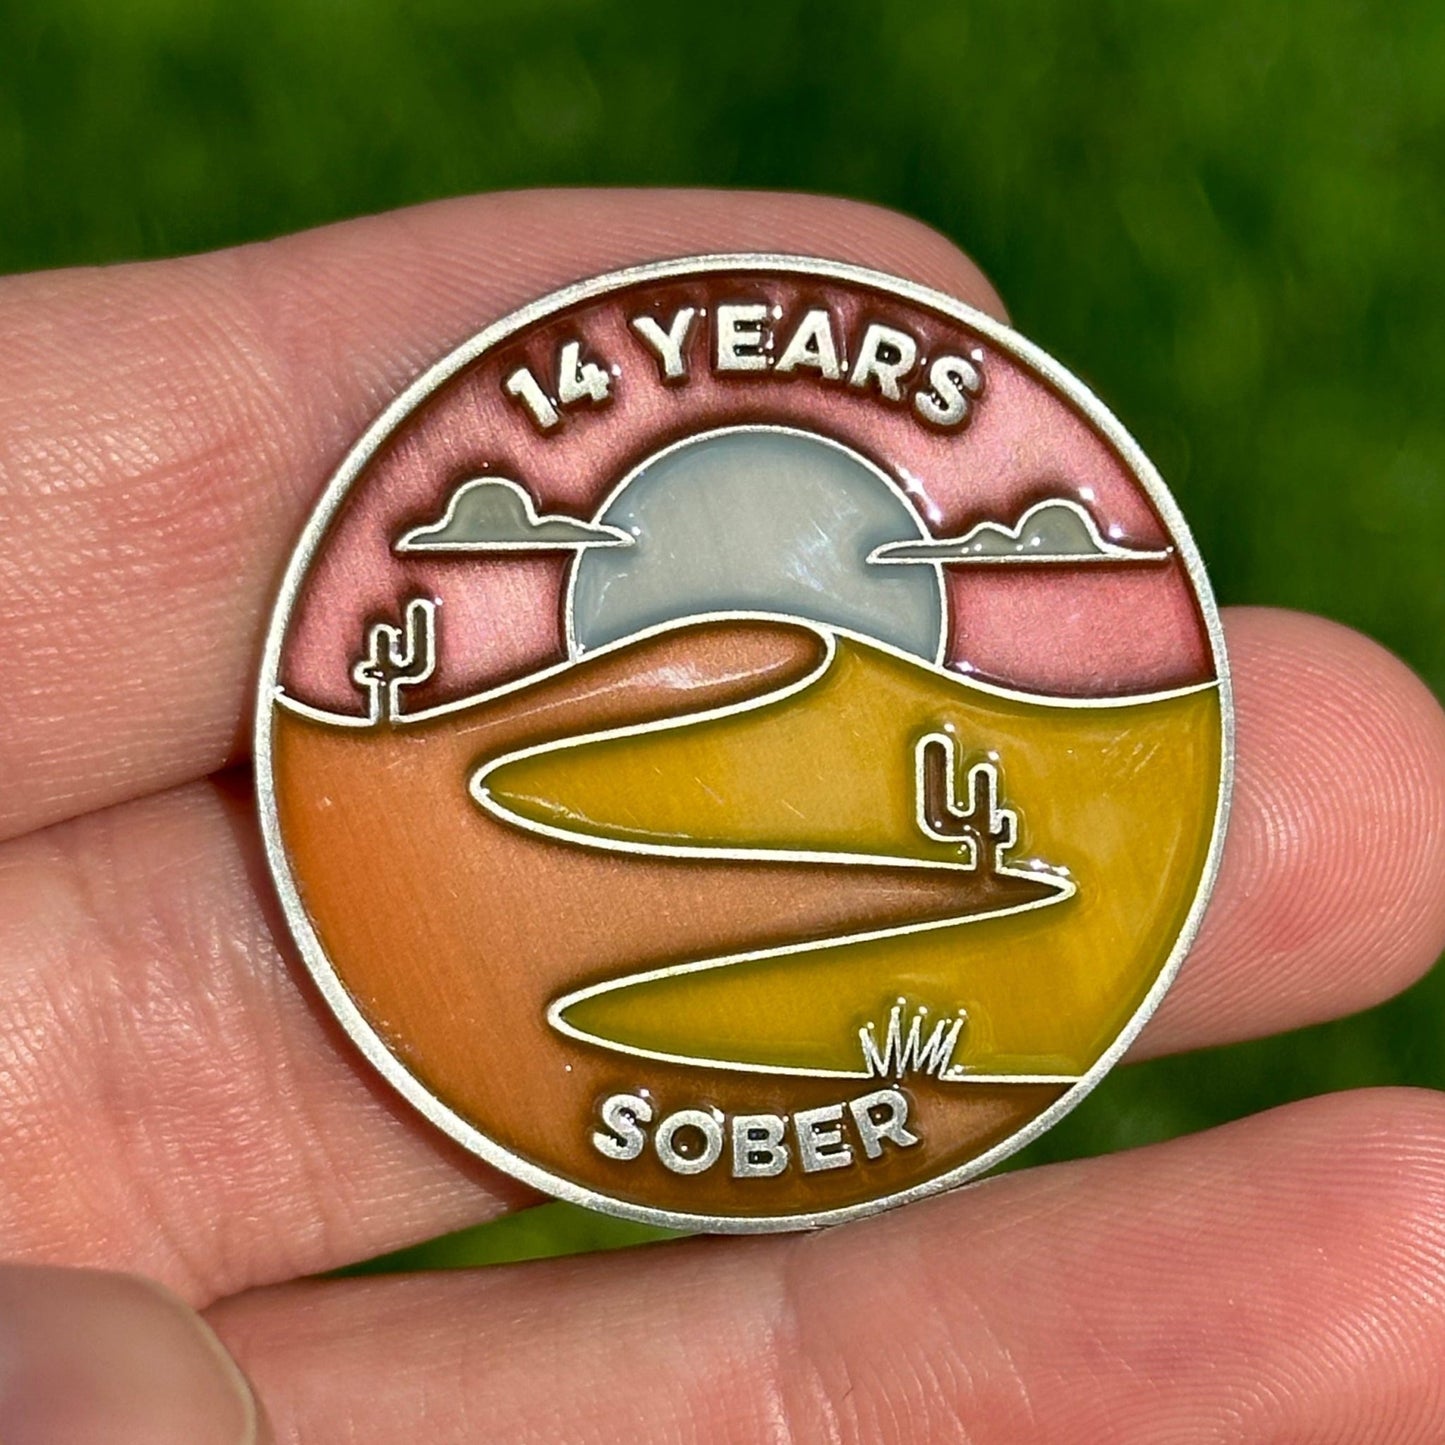 Fourteen Years Sober sobriety coin - The Achieve Mint